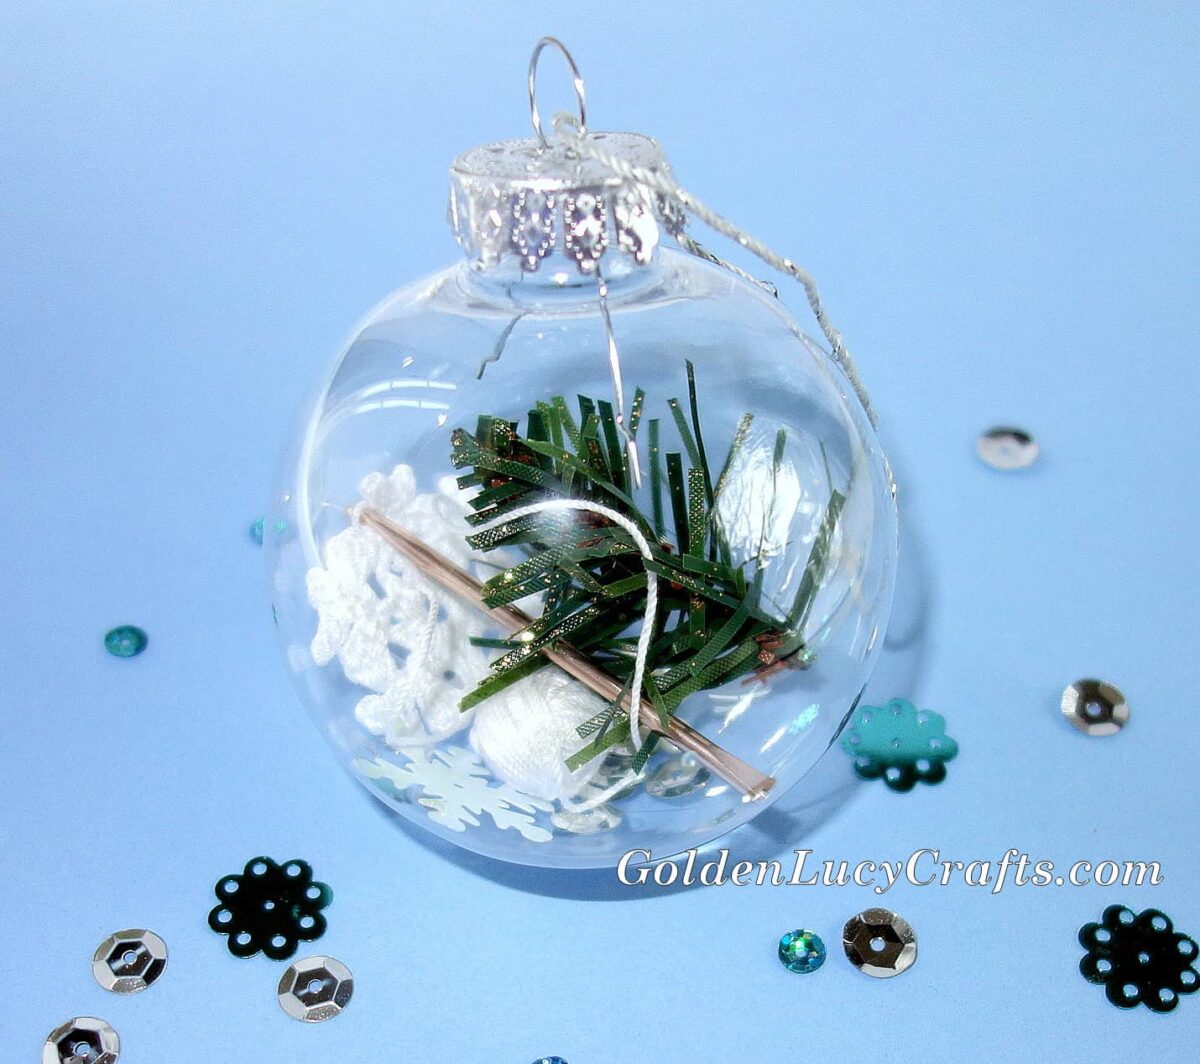 Handmade clear ball Christmas ornament filled with piece of Christmas tree, small crochet snowflake and crochet hook.